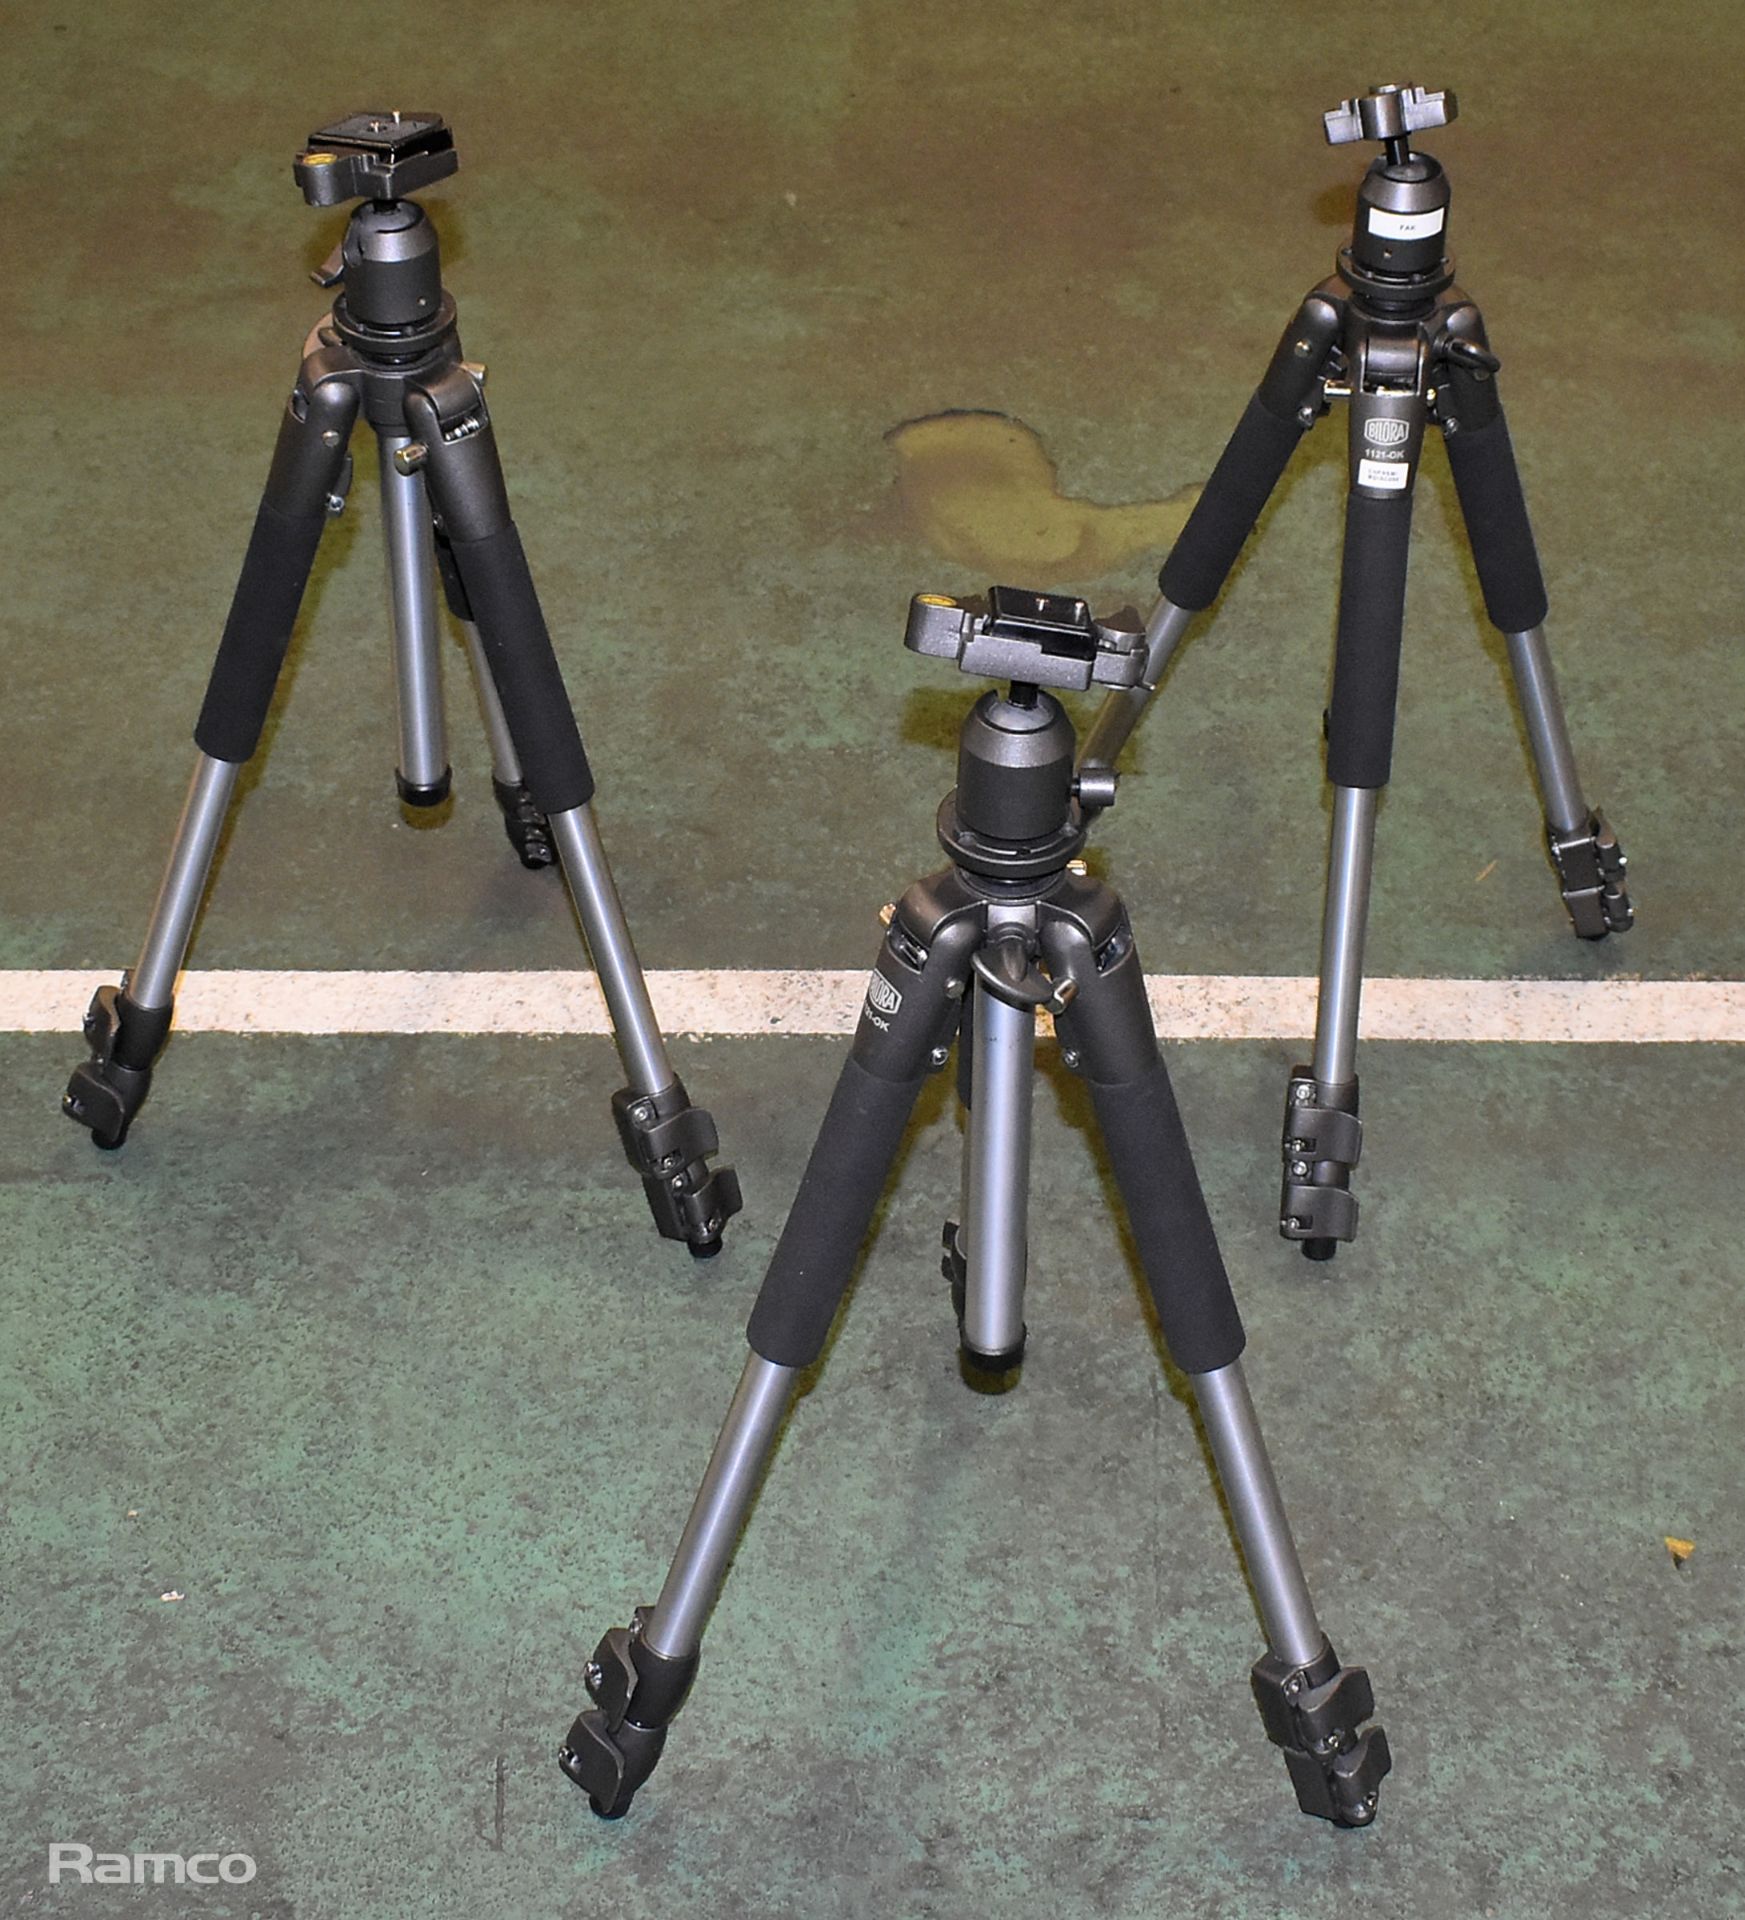 3x Bilora 1121-OK 59-143cm tripods with carry case - Image 3 of 7